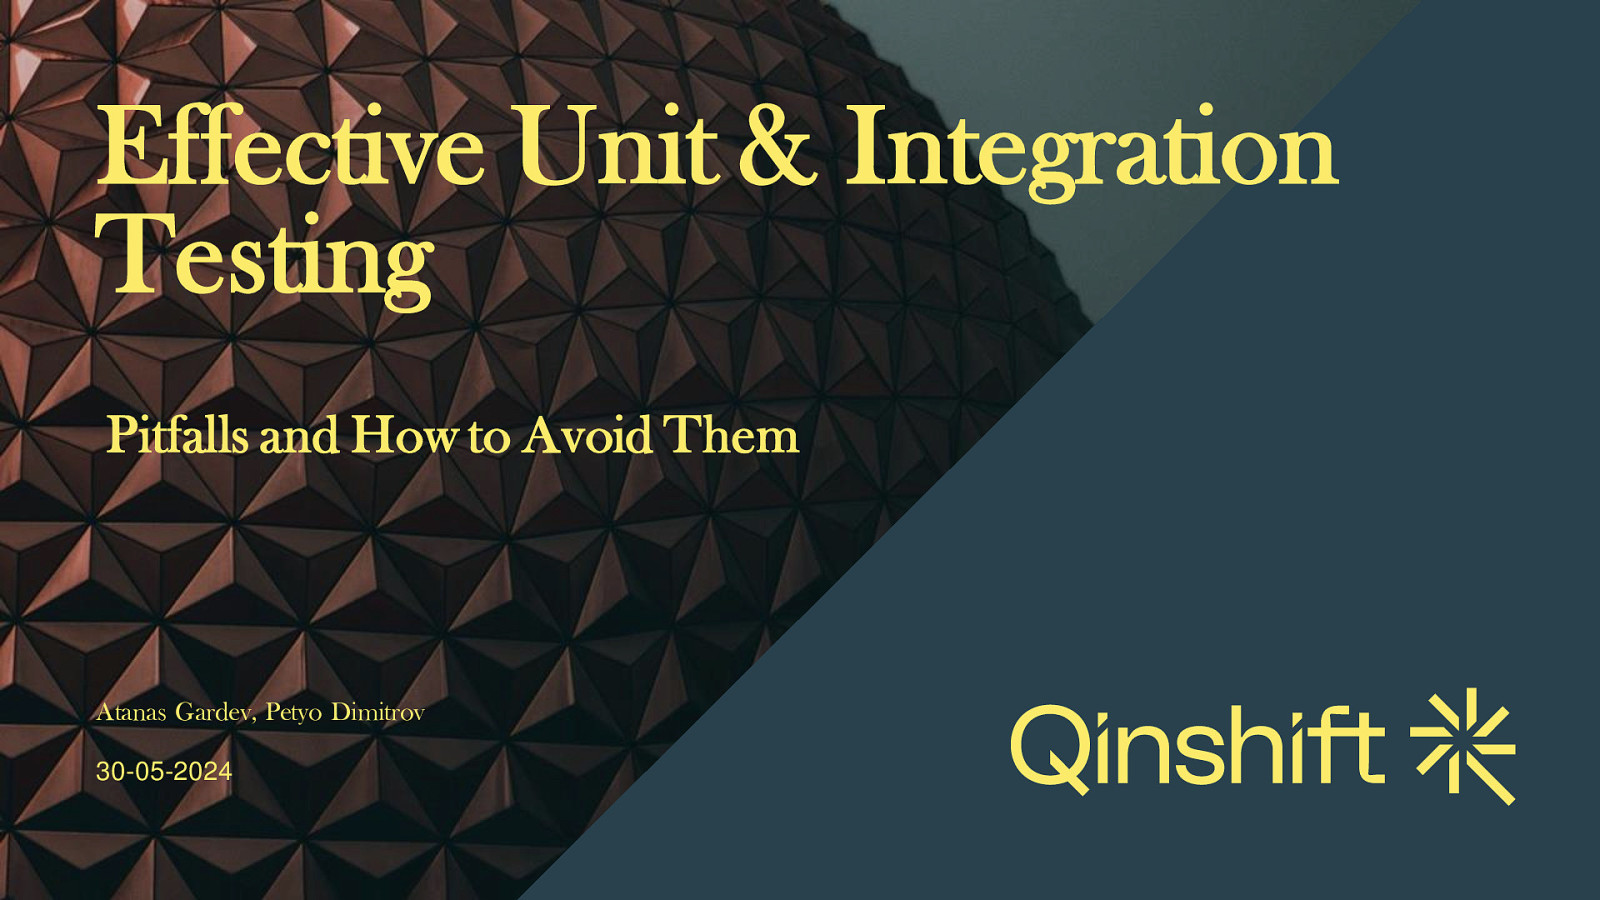 Effective Unit & Integration Testing - Pitfalls and How to Avoid Them